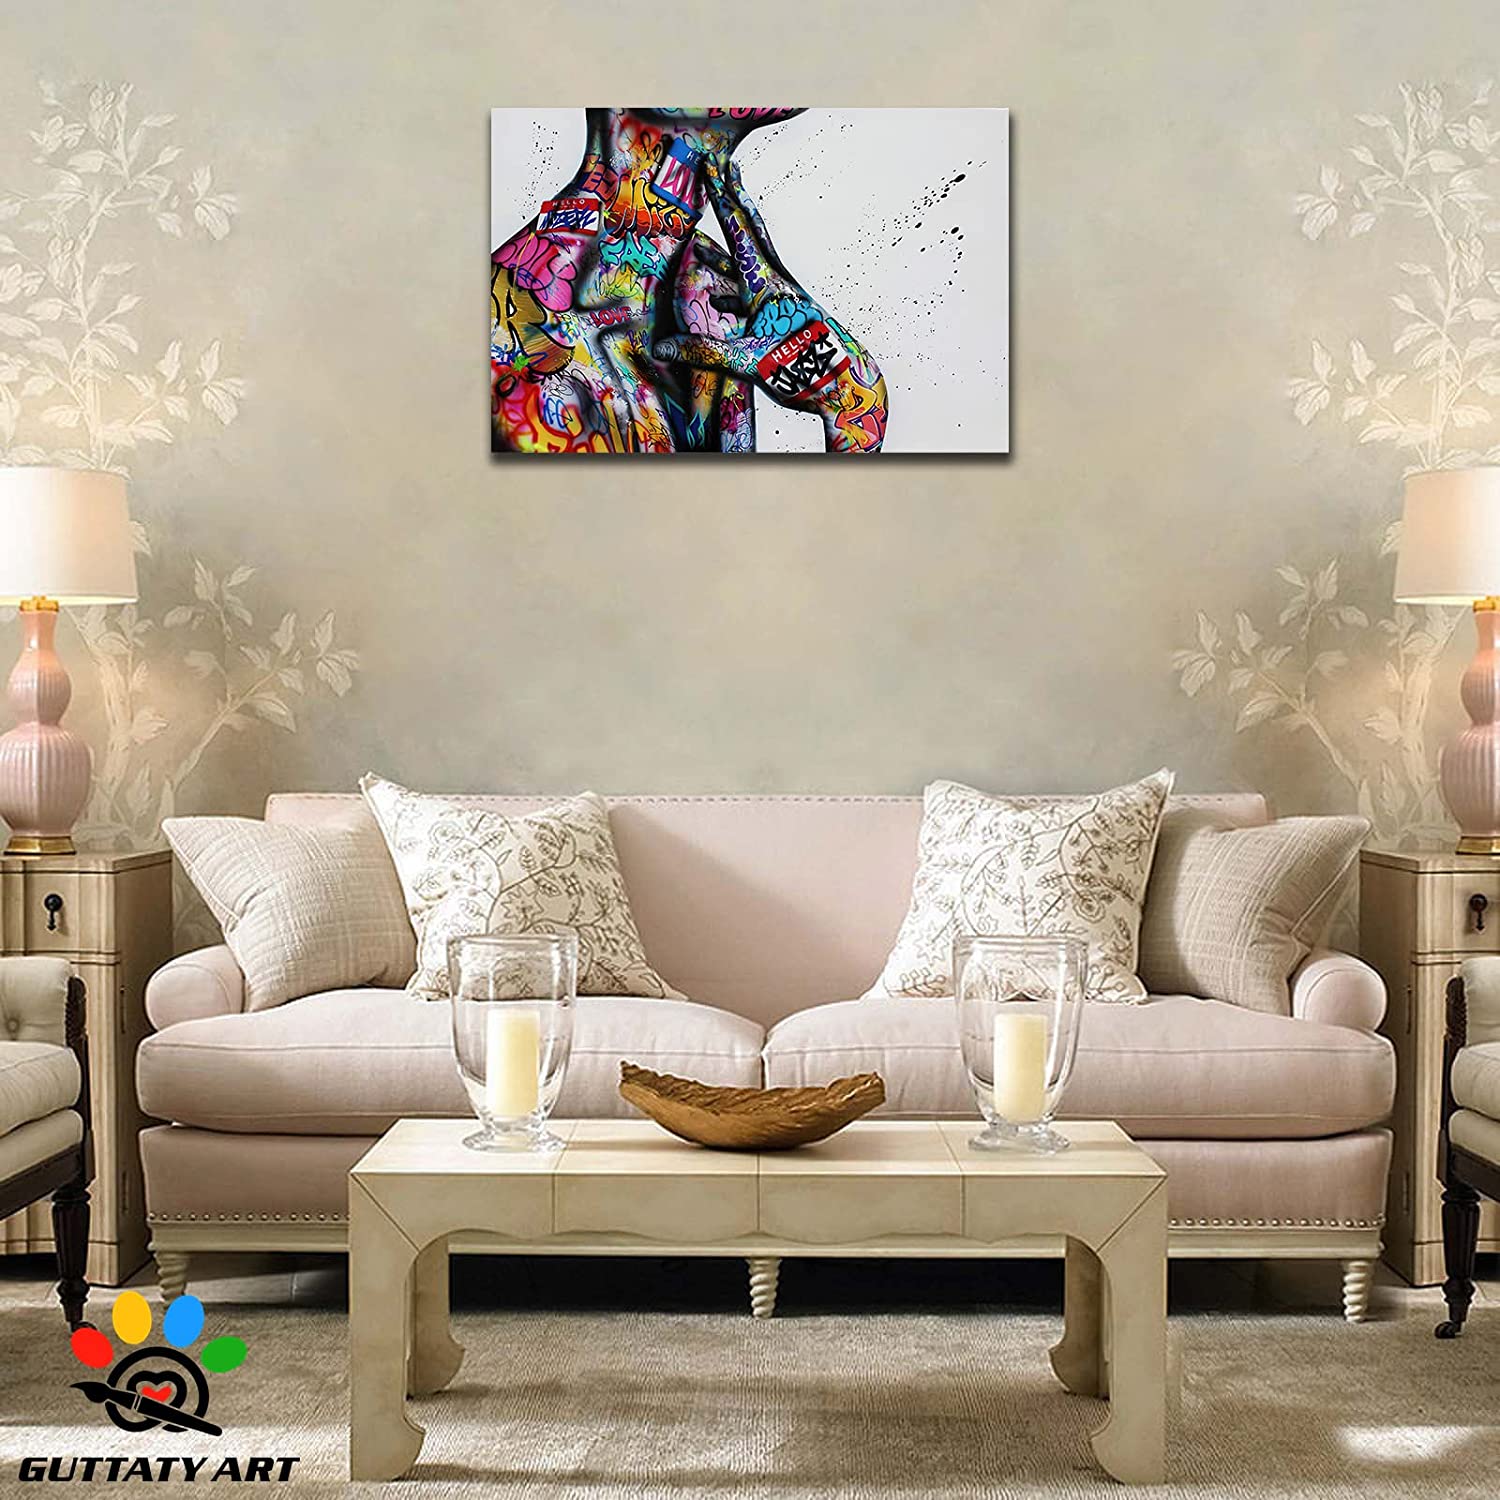 Graffiti Canvas Wall Art,Graffiti Canvas Wall Art,Modern Street Graffiti  Wall Art,Colorful Graffiti Street Wall Art,Body Text Graffiti Art Painting  for Living Room Bedroom Decor 12x18 Inches